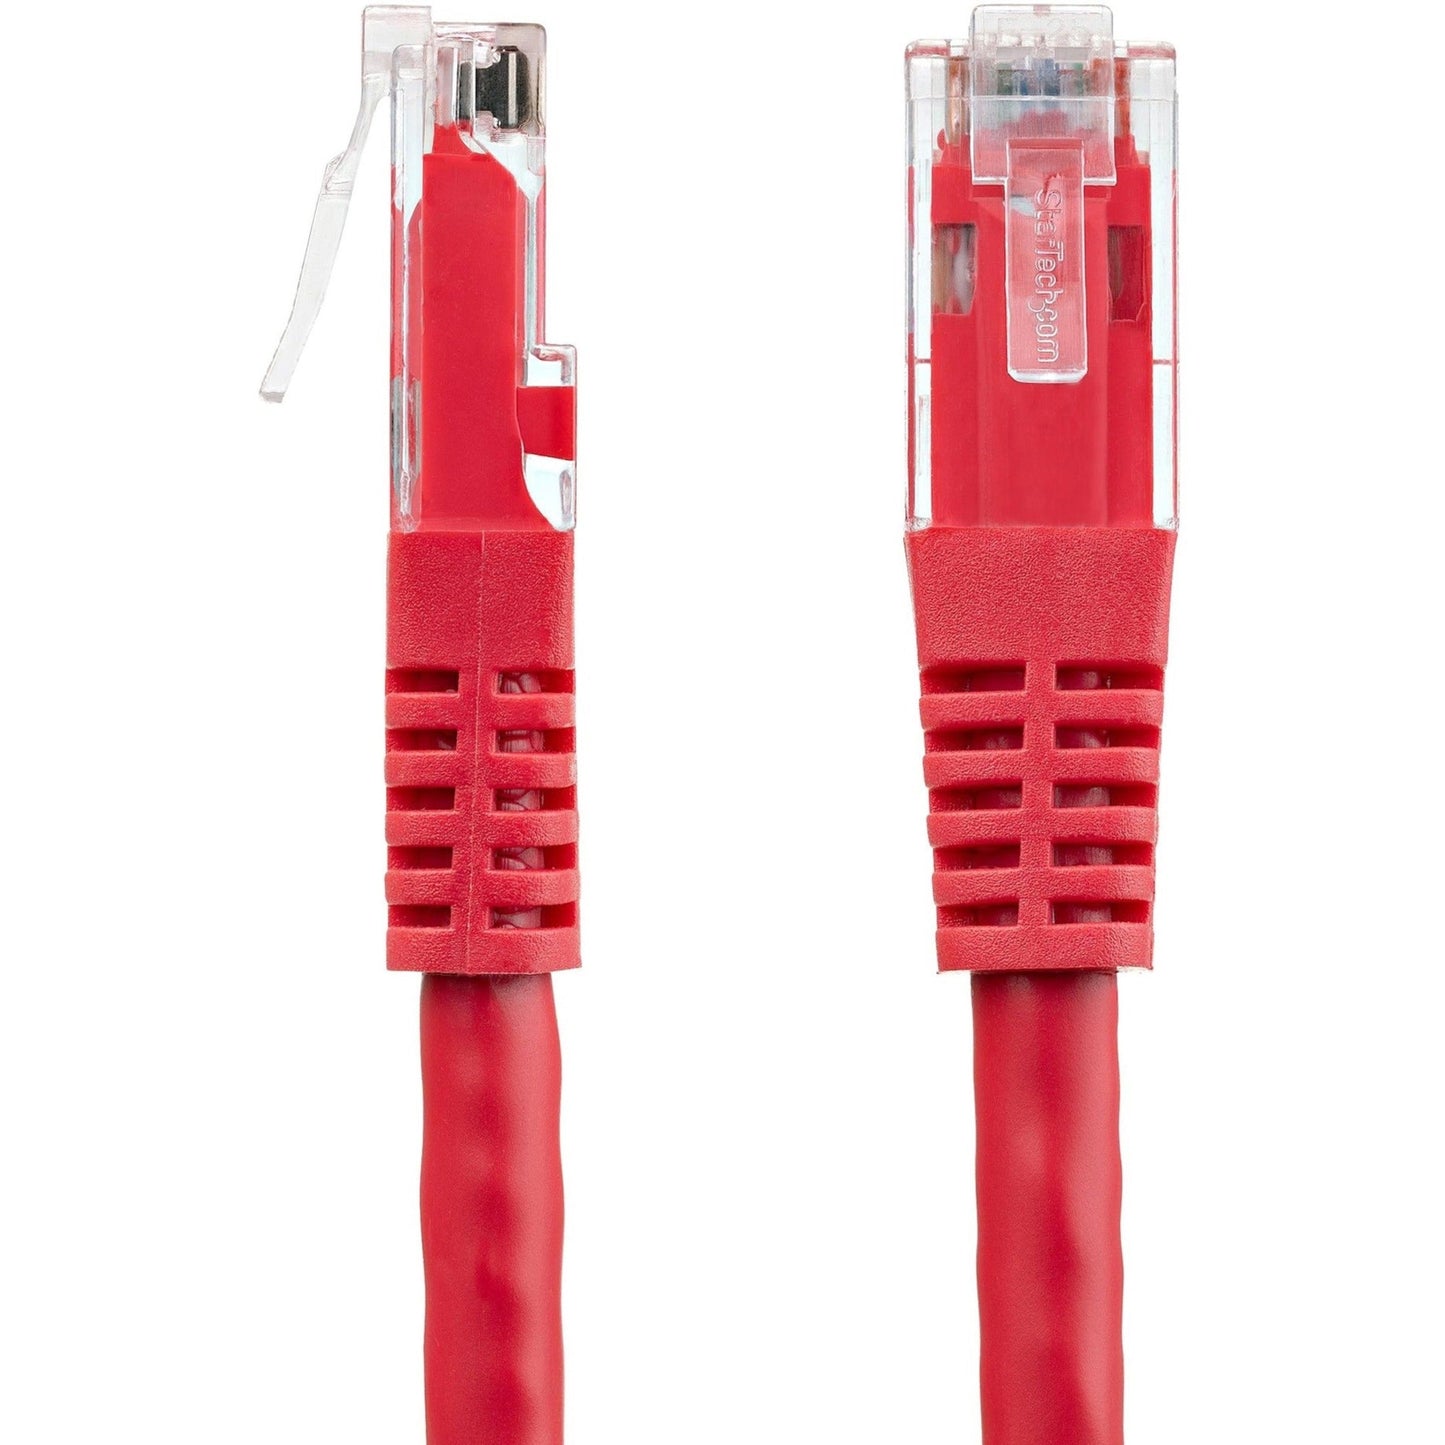 StarTech.com 5ft CAT6 Ethernet Cable - Red Molded Gigabit - 100W PoE UTP 650MHz - Category 6 Patch Cord UL Certified Wiring/TIA